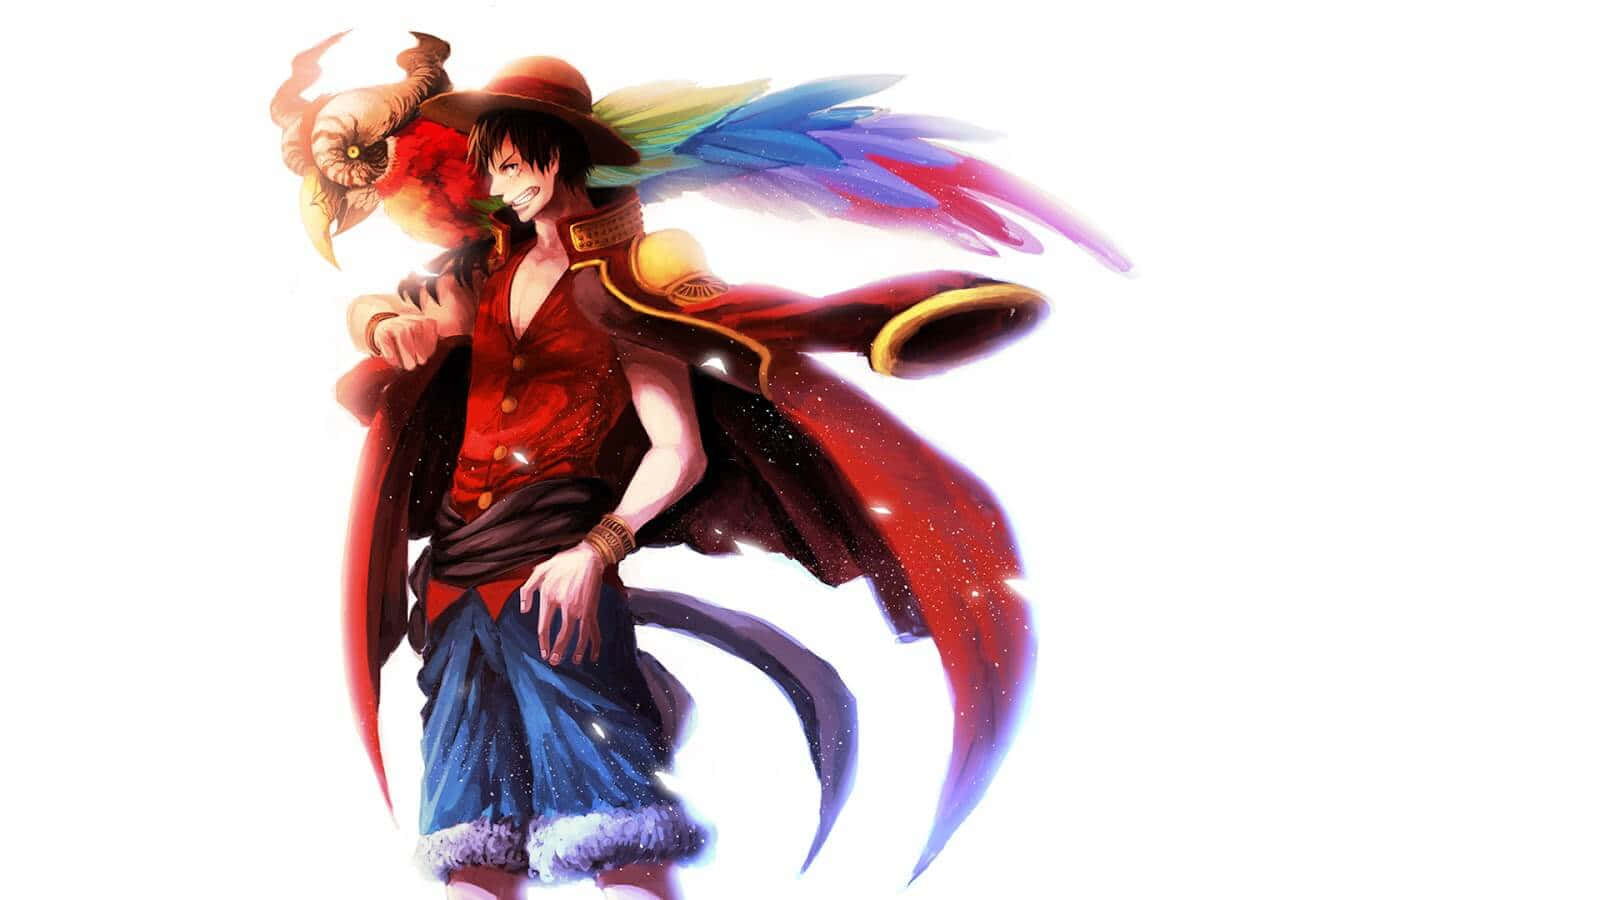 Luffy representing power and joy Wallpaper